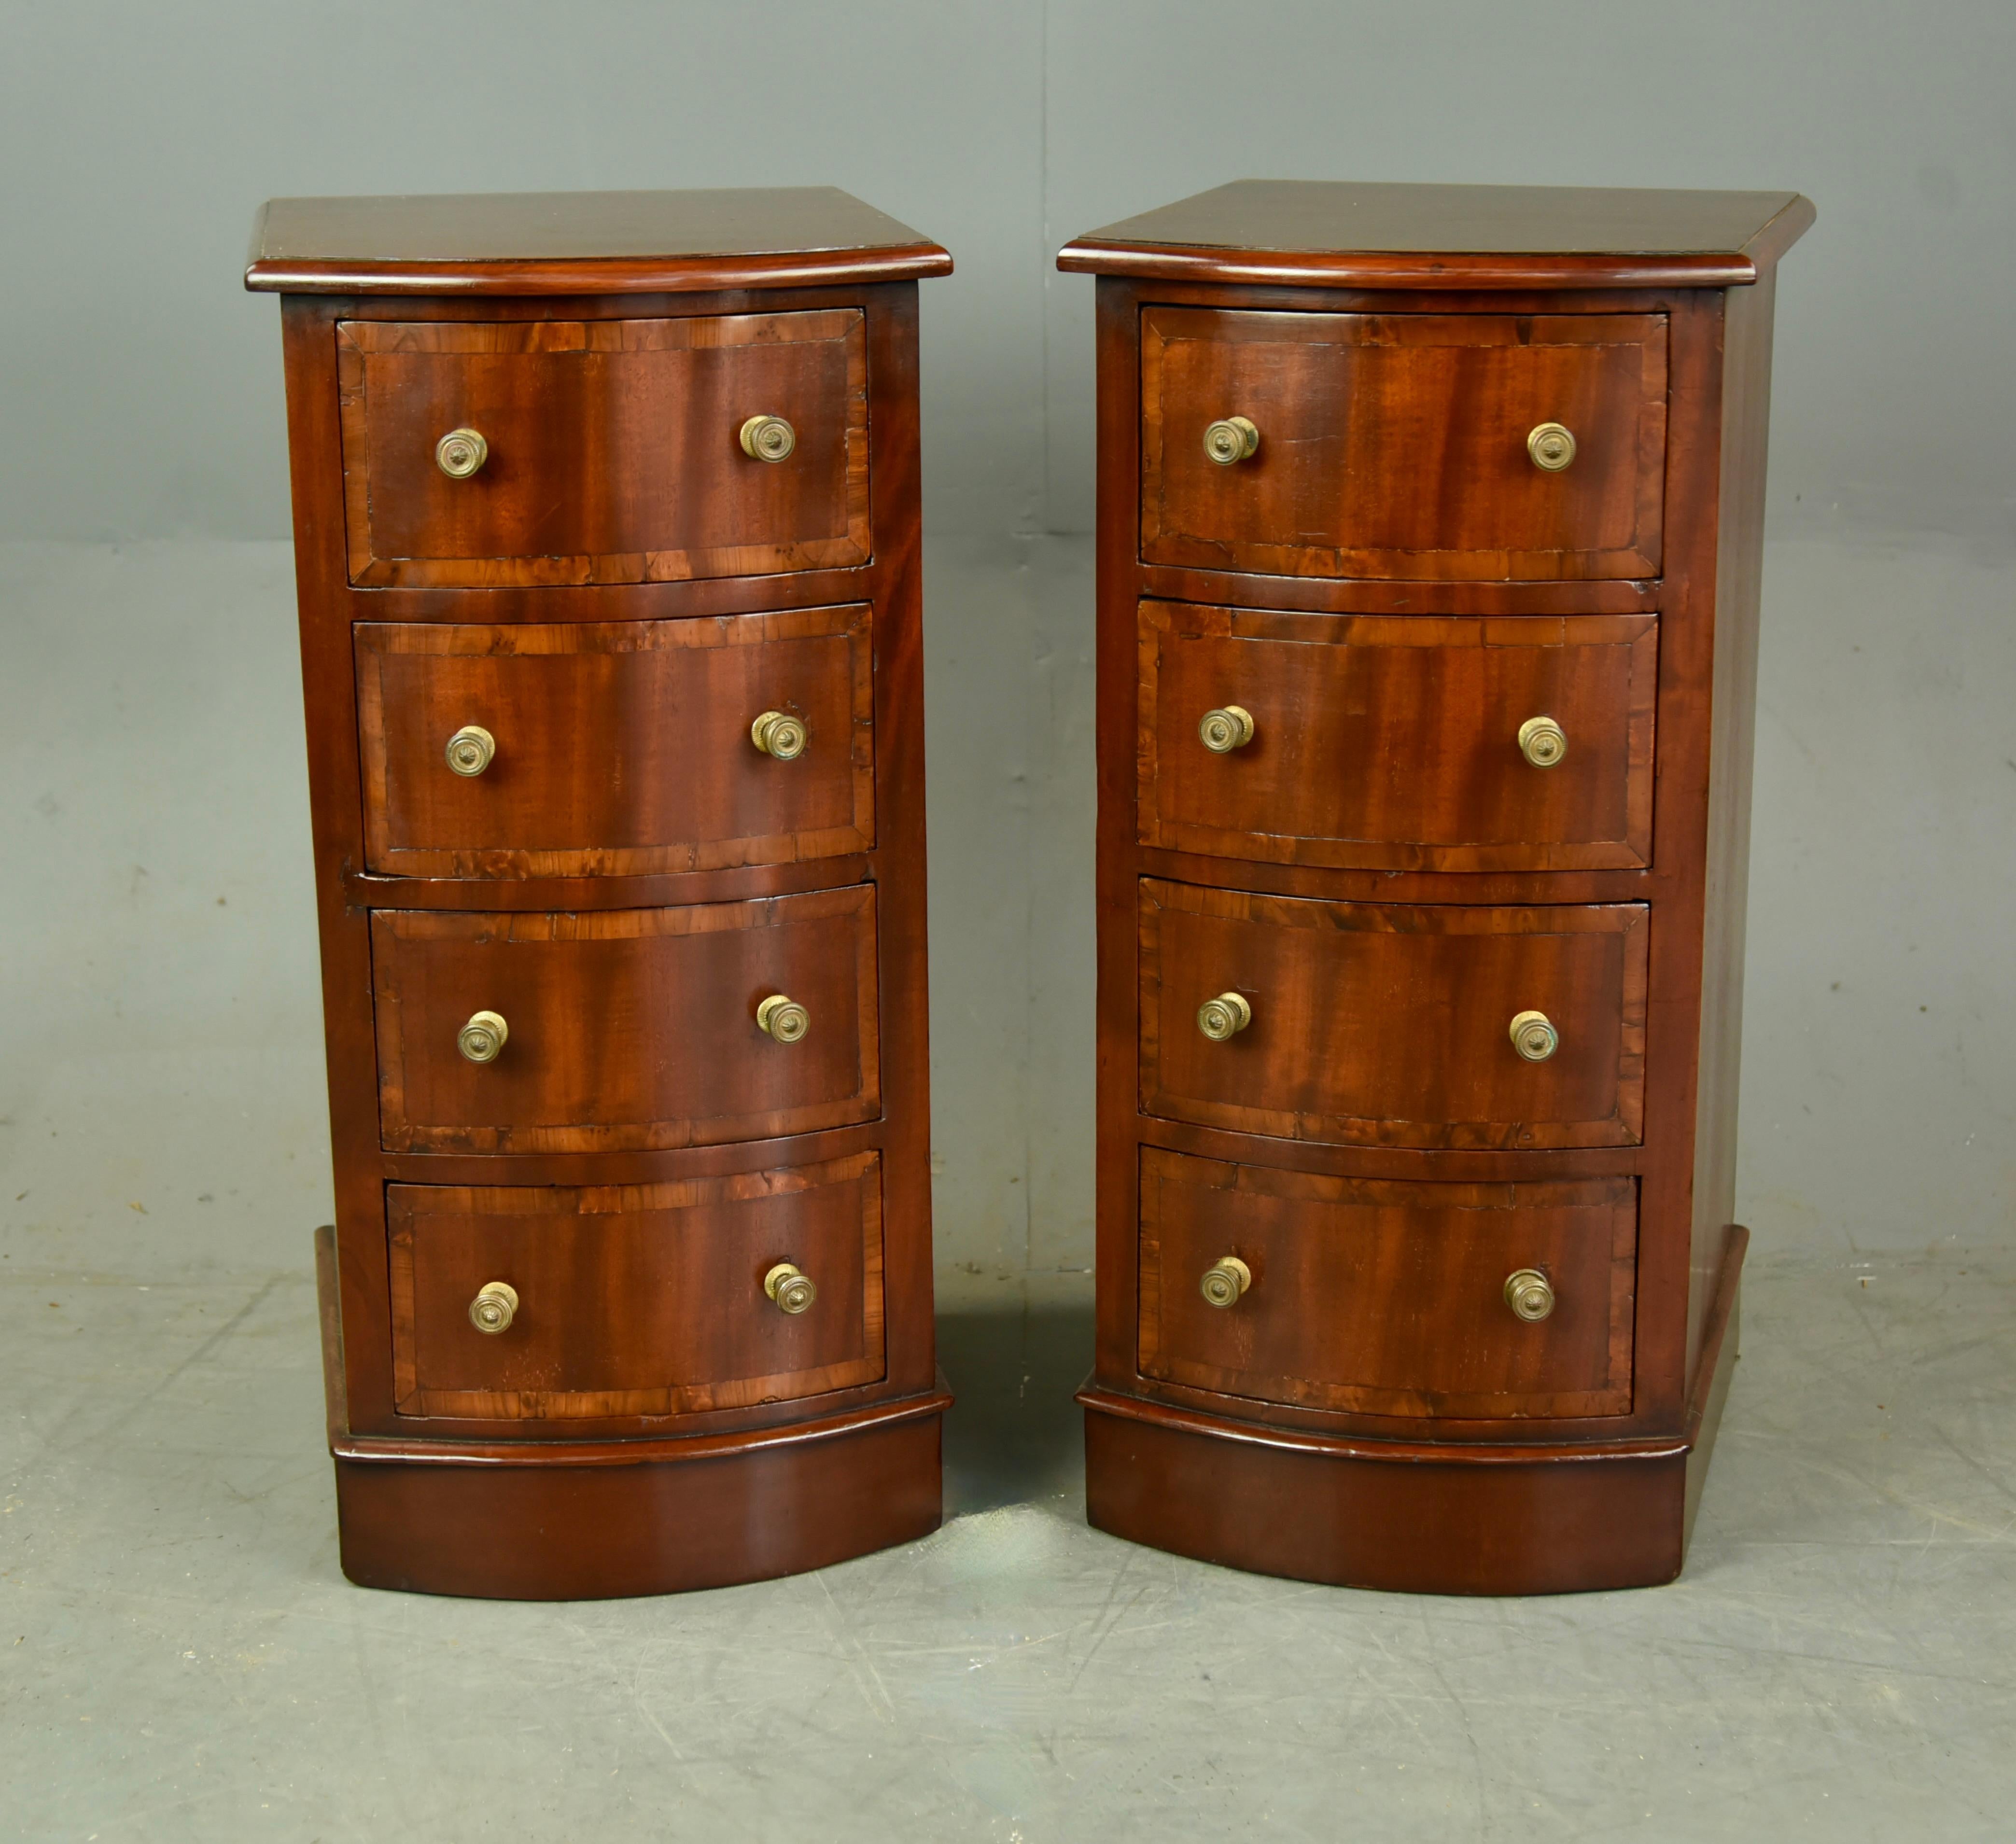 Fine and rare pair of English 19th century Regency style bow front bedside chests of drawers circa 1870 .

Both chests have 4 graduating drawers that have solid brass knobs with yew cross banded drawers .
This unique pair of bedside chests are in